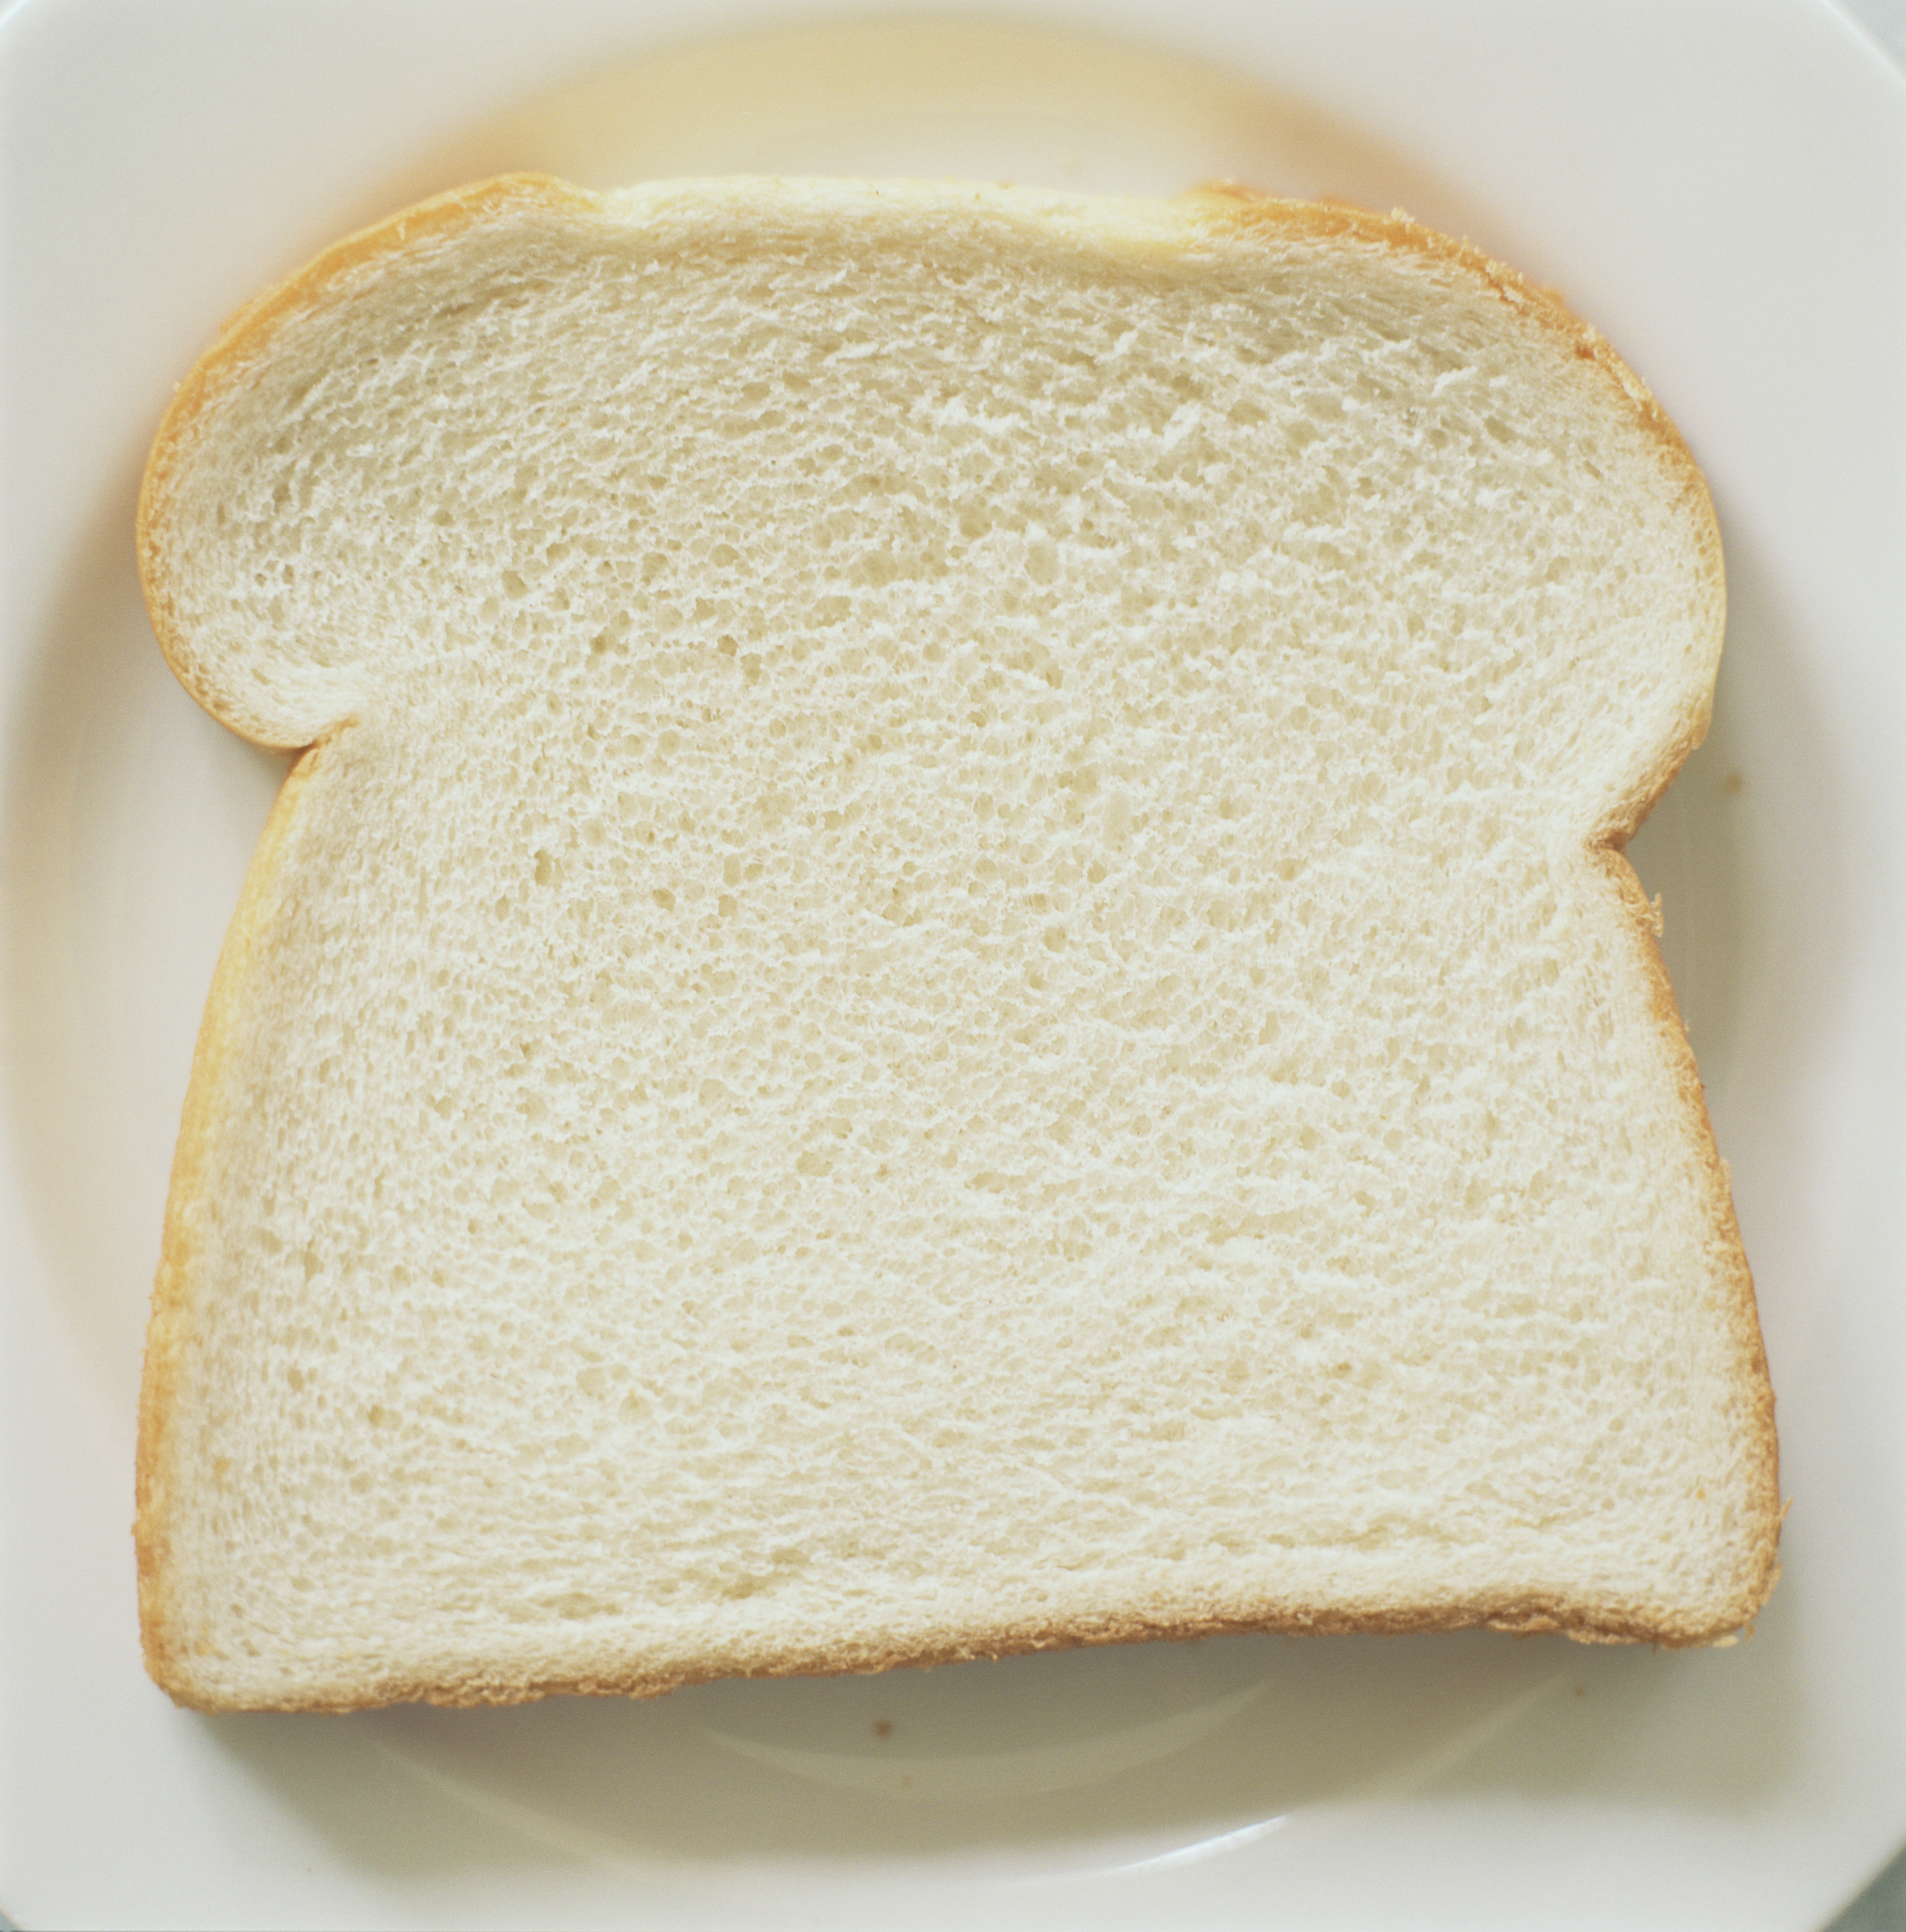 There are many strategies for avoiding white bread (Angela Wyant&mdash;Getty Images)